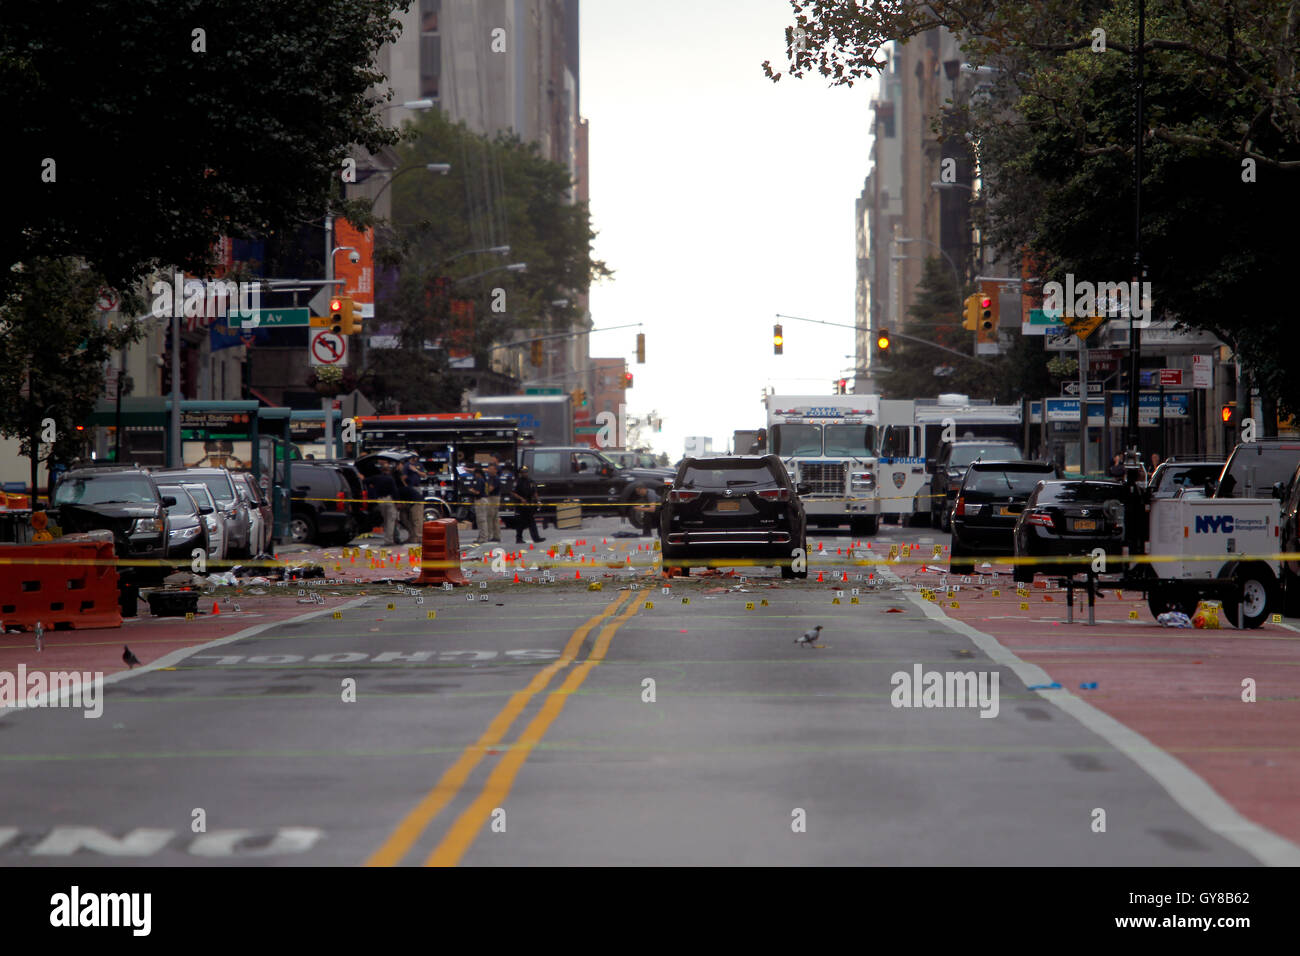 New York, USA. 18th Sep, 2016. Police, and law enforcement personnel from various agencies examine the area for clues the morning after last night's explosion on New York's West 23rd Street between 6th and 7th Avenues in the Chelsea section of Manhattan. the view is looking east on 23rd street from 7th Avenue towards 6th Avenue. The area is marked for clues amidst the debris. 29 people were injured in the blast which has been described by officials as intentional. Credit:  Adam Stoltman/Alamy Live News Stock Photo